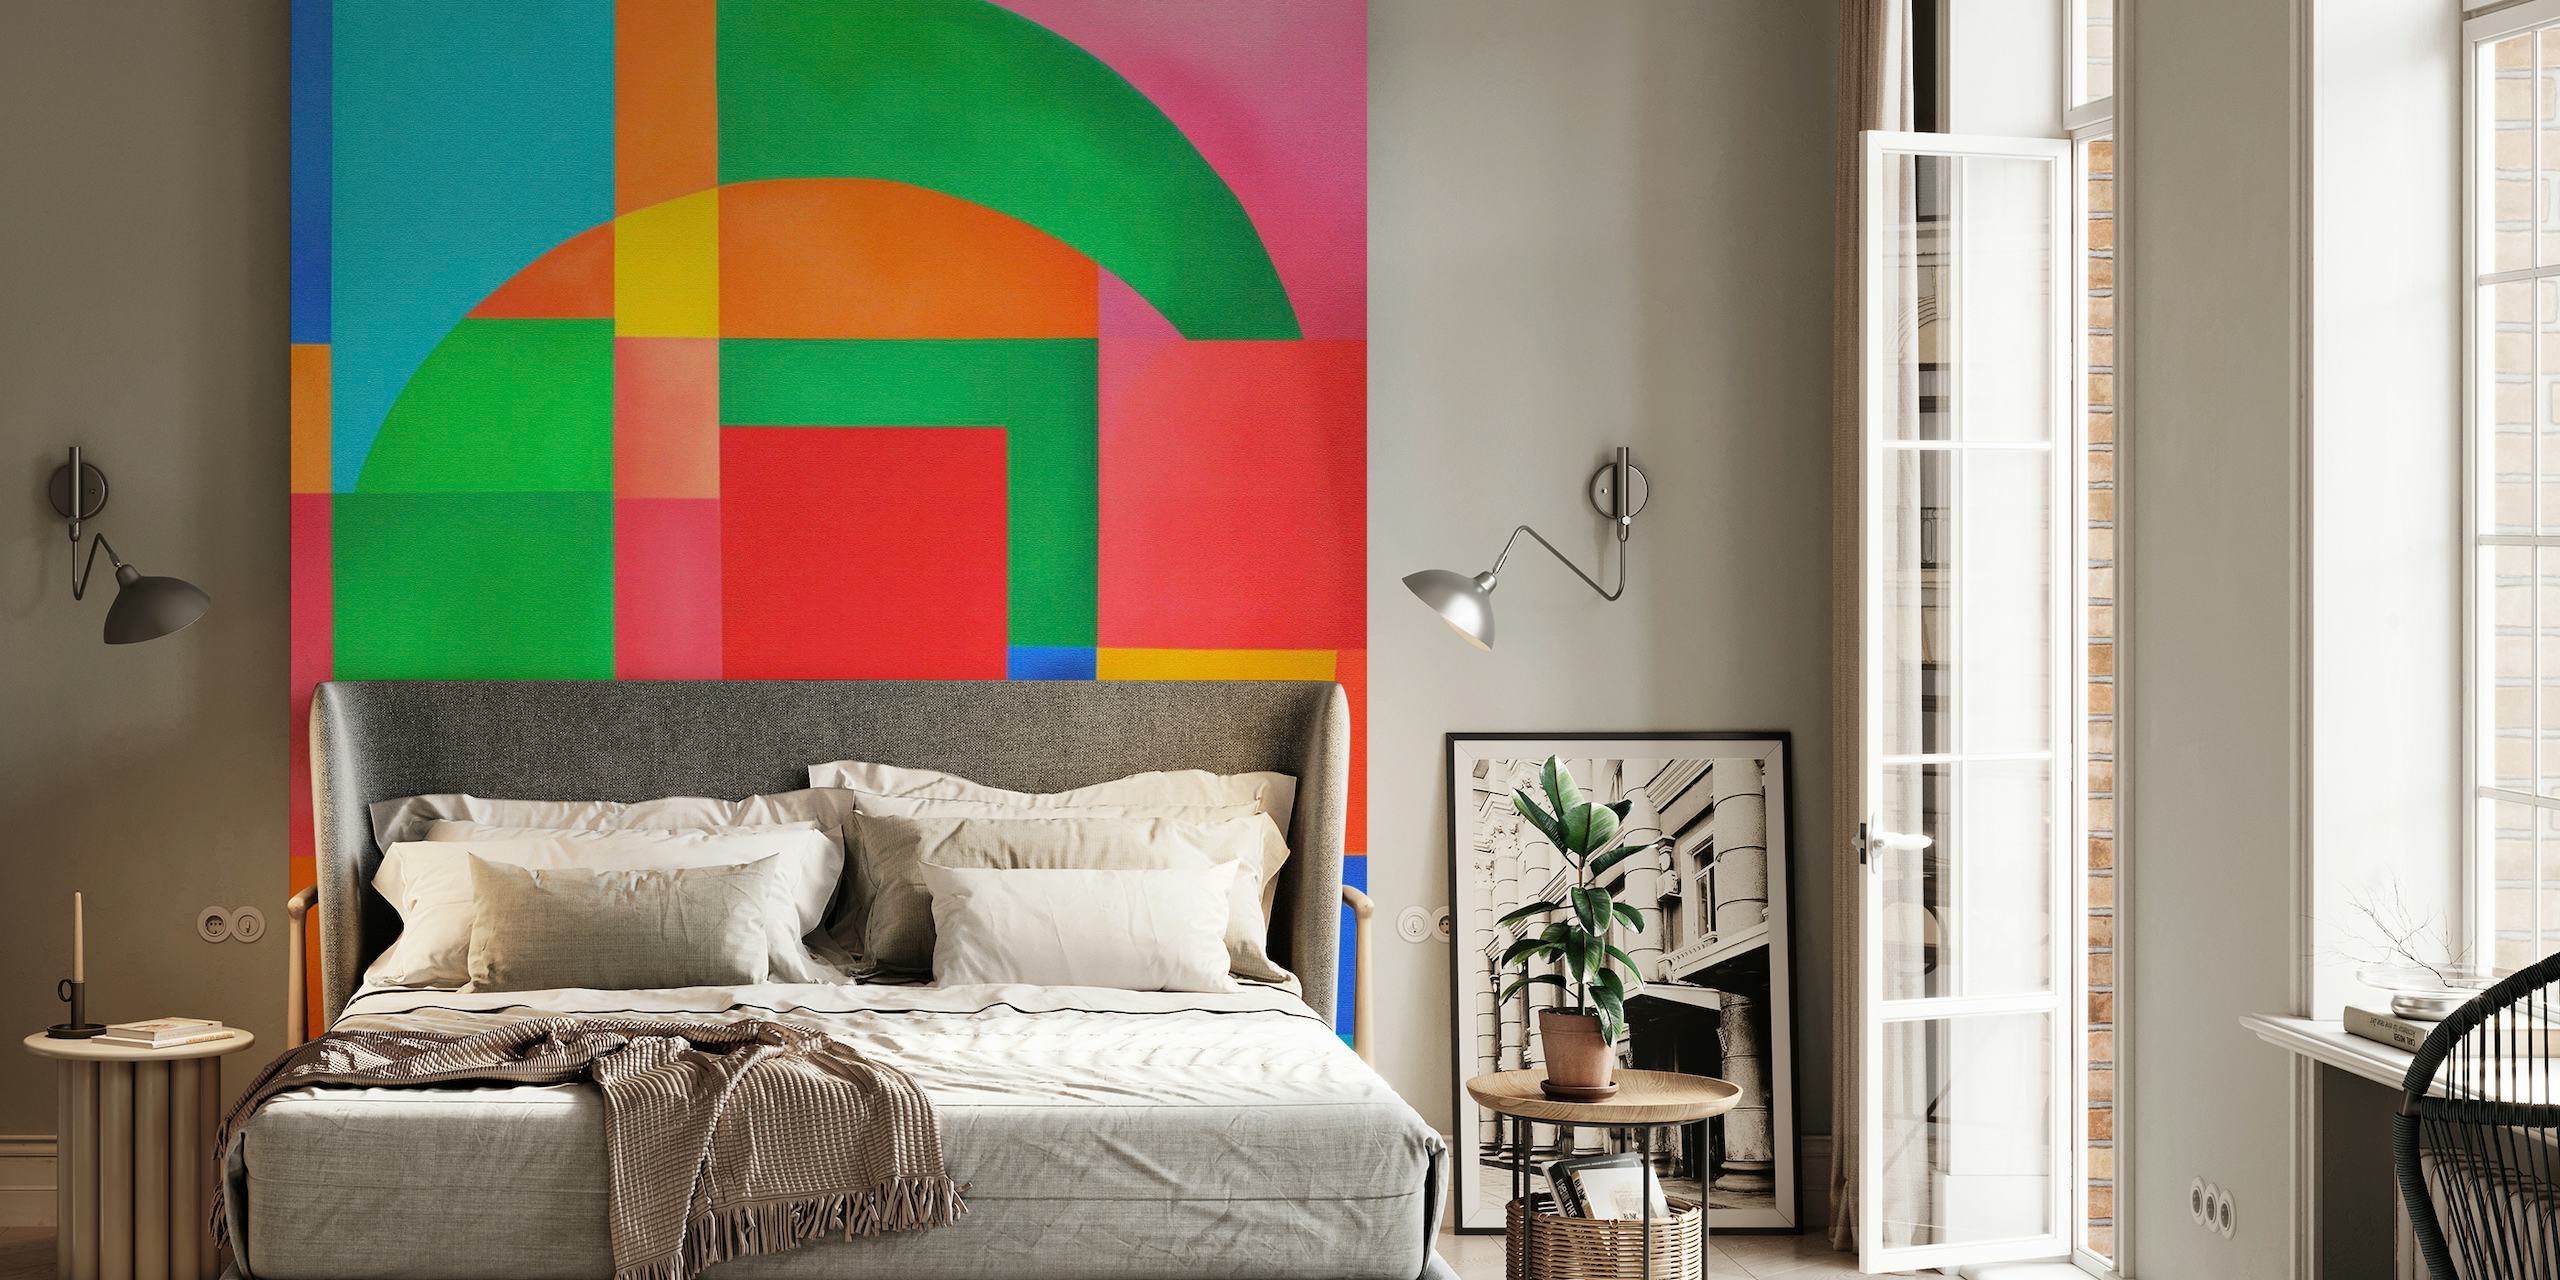 Colorful geometric shapes wall mural with a retro design